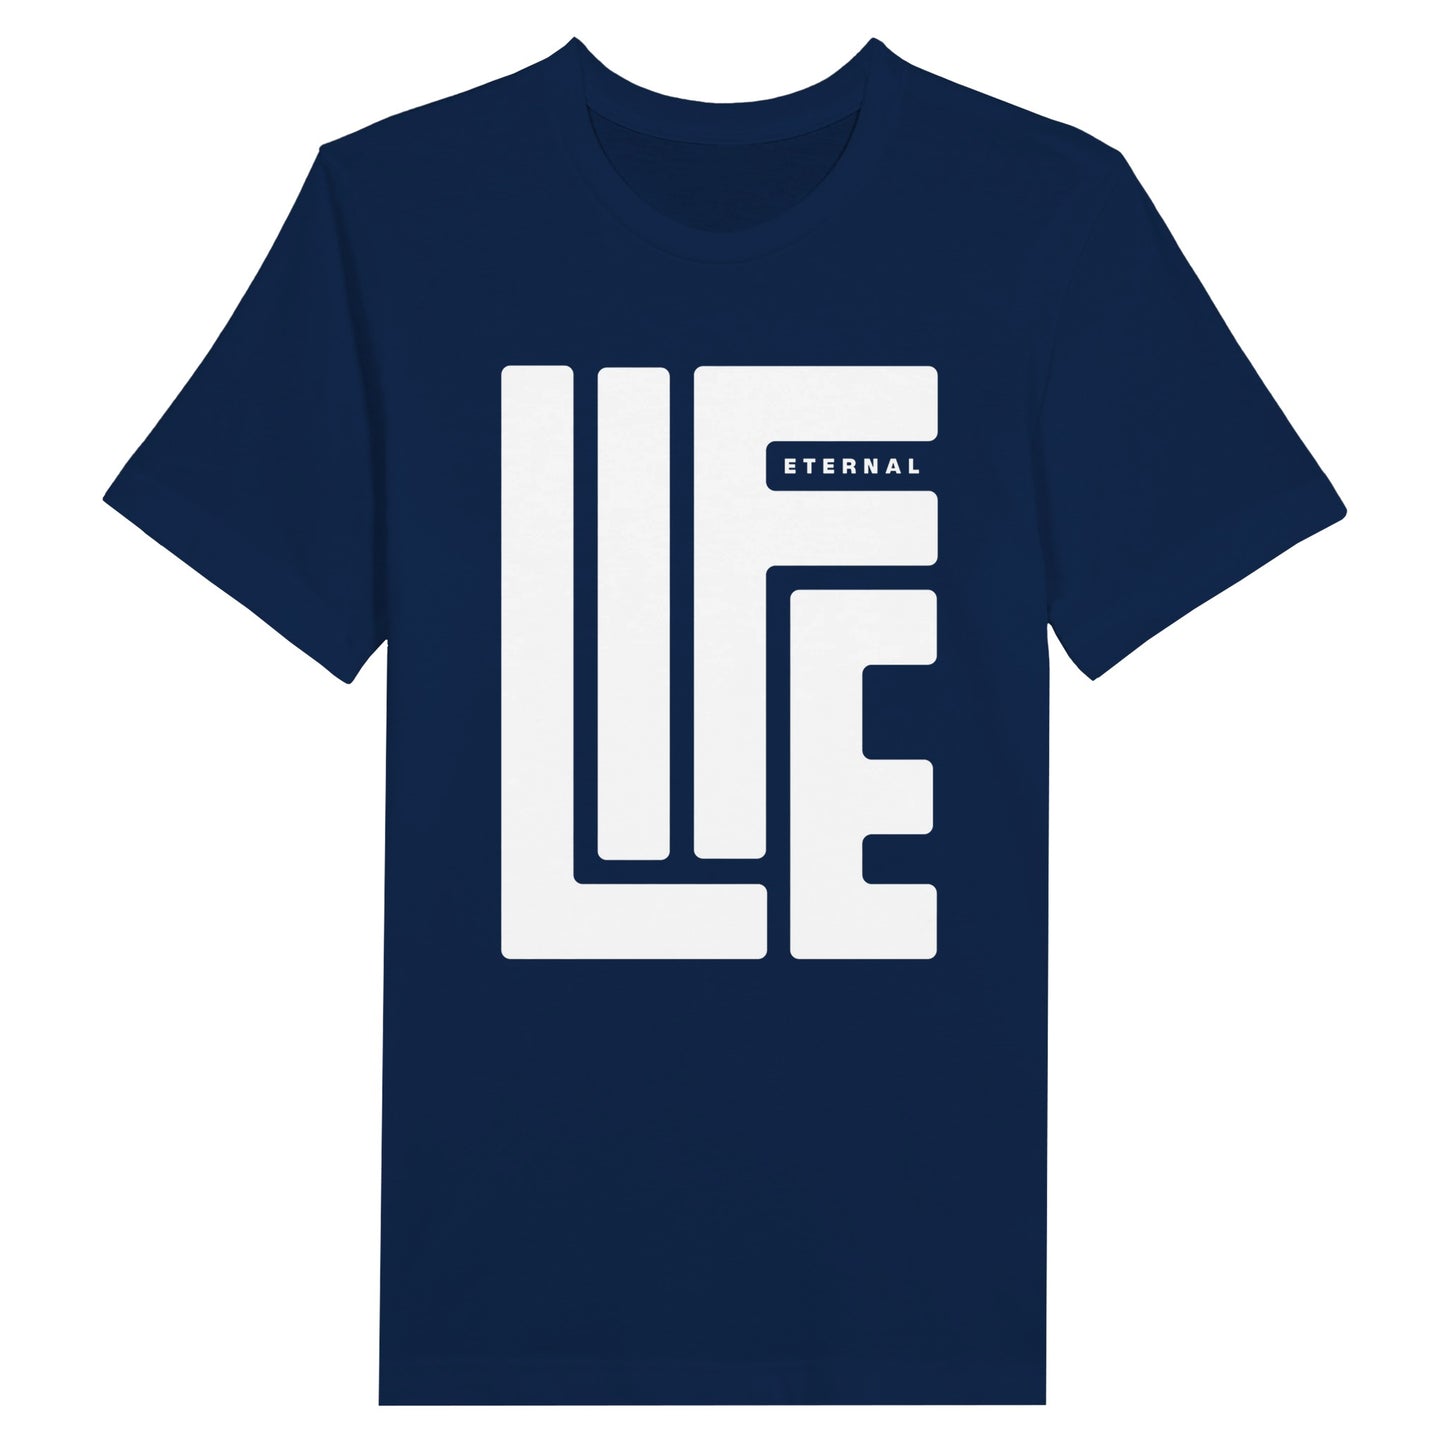 An image of ETERNAL LIFE (Navy) | Premium Unisex Christian T-shirt available at 3rd Day Christian Clothing UK